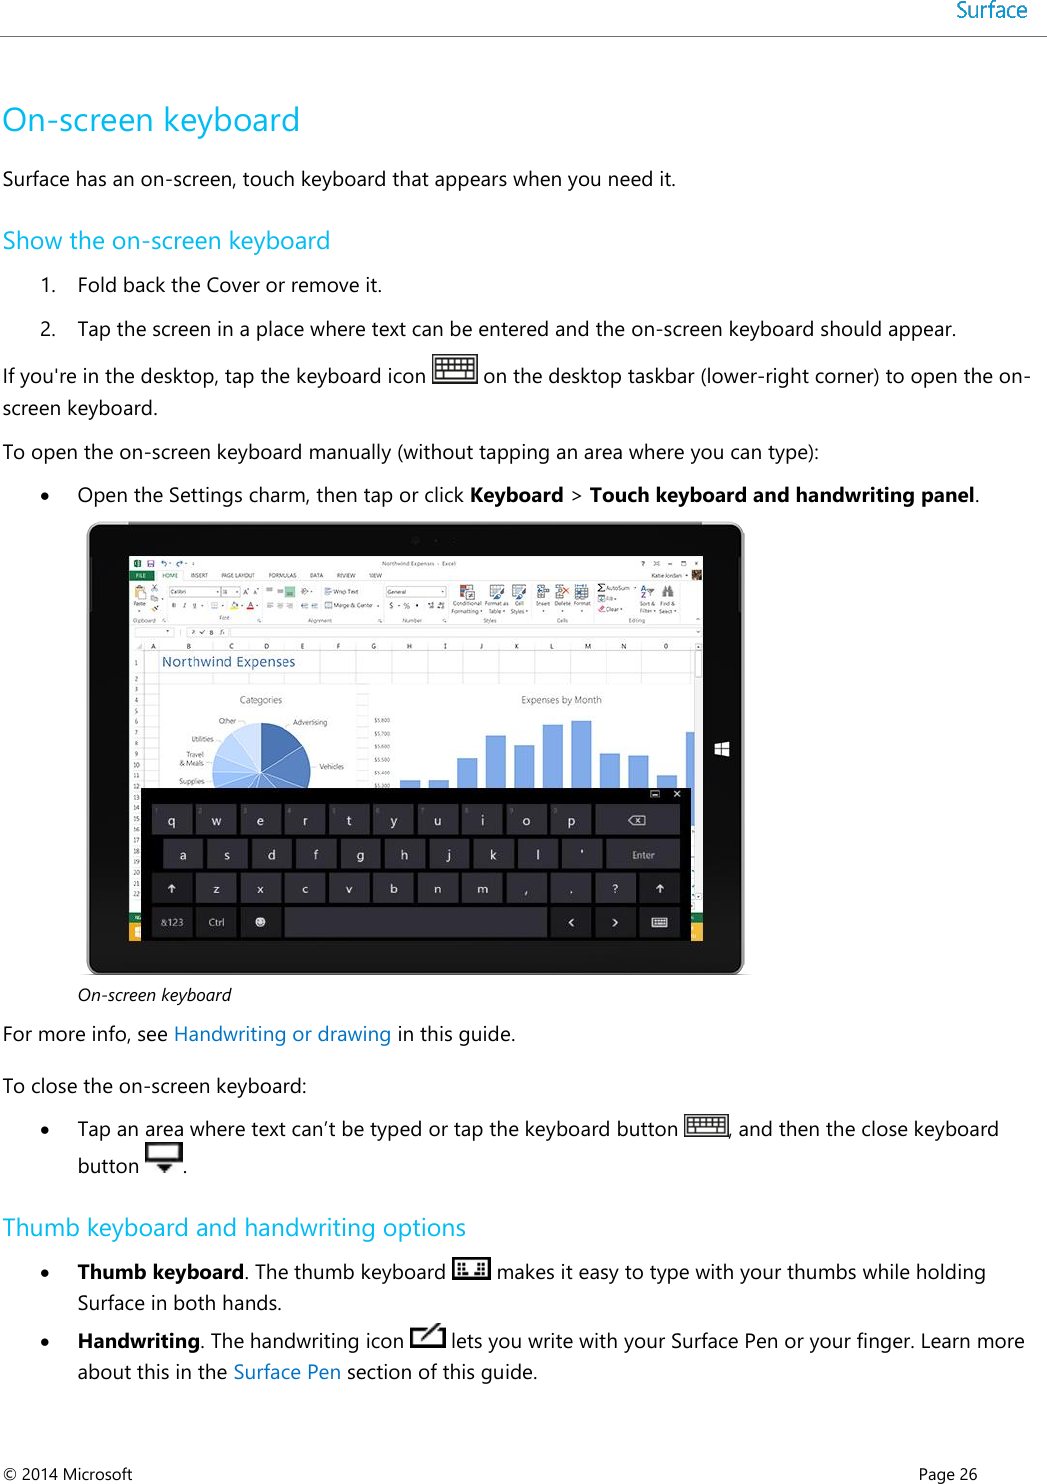  © 2014 Microsoft      Page 26  On-screen keyboard  Surface has an on-screen, touch keyboard that appears when you need it.  Show the on-screen keyboard 1. Fold back the Cover or remove it.  2. Tap the screen in a place where text can be entered and the on-screen keyboard should appear.  If you&apos;re in the desktop, tap the keyboard icon   on the desktop taskbar (lower-right corner) to open the on-screen keyboard. To open the on-screen keyboard manually (without tapping an area where you can type):  Open the Settings charm, then tap or click Keyboard &gt; Touch keyboard and handwriting panel.   On-screen keyboard  For more info, see Handwriting or drawing in this guide. To close the on-screen keyboard:  Tap an area where text can’t be typed or tap the keyboard button  , and then the close keyboard button  . Thumb keyboard and handwriting options   Thumb keyboard. The thumb keyboard   makes it easy to type with your thumbs while holding Surface in both hands.    Handwriting. The handwriting icon   lets you write with your Surface Pen or your finger. Learn more about this in the Surface Pen section of this guide.  